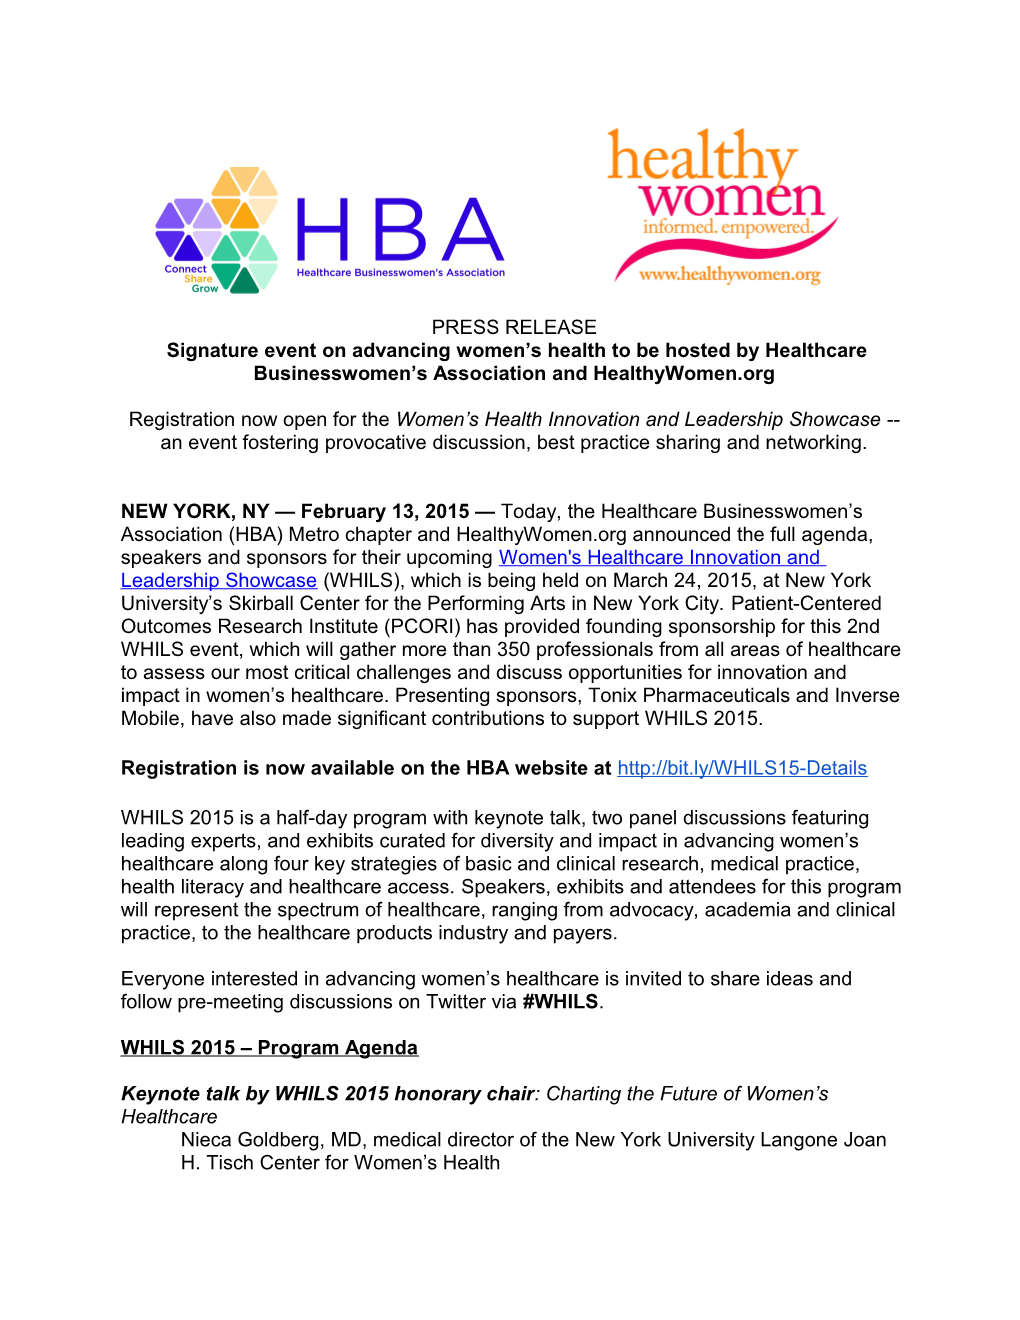 Signature Event on Advancing Women S Health to Be Hosted by Healthcare Businesswomen S